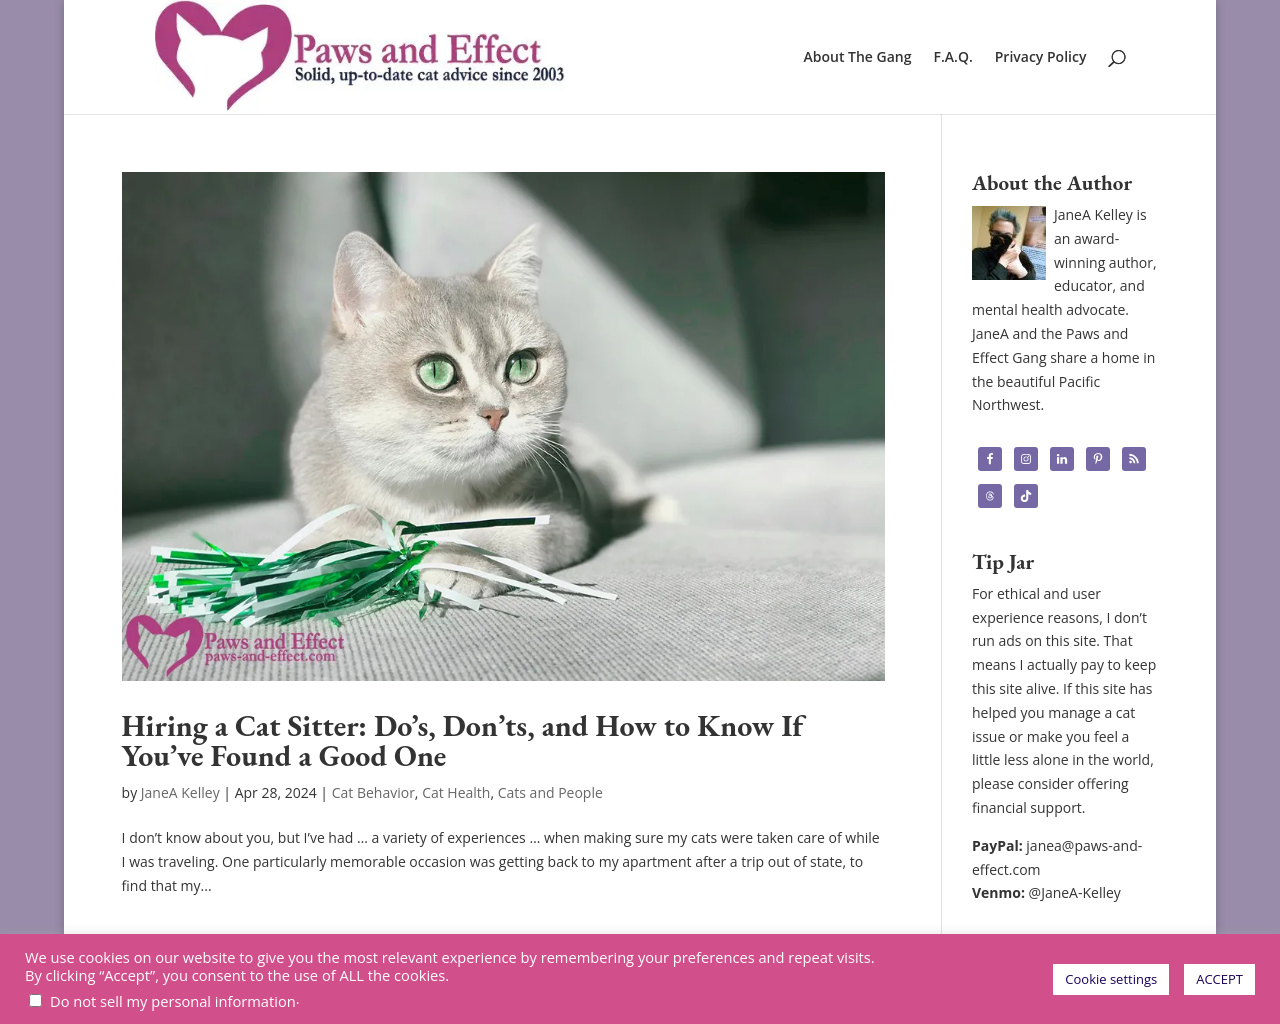 paws-and-effect.com